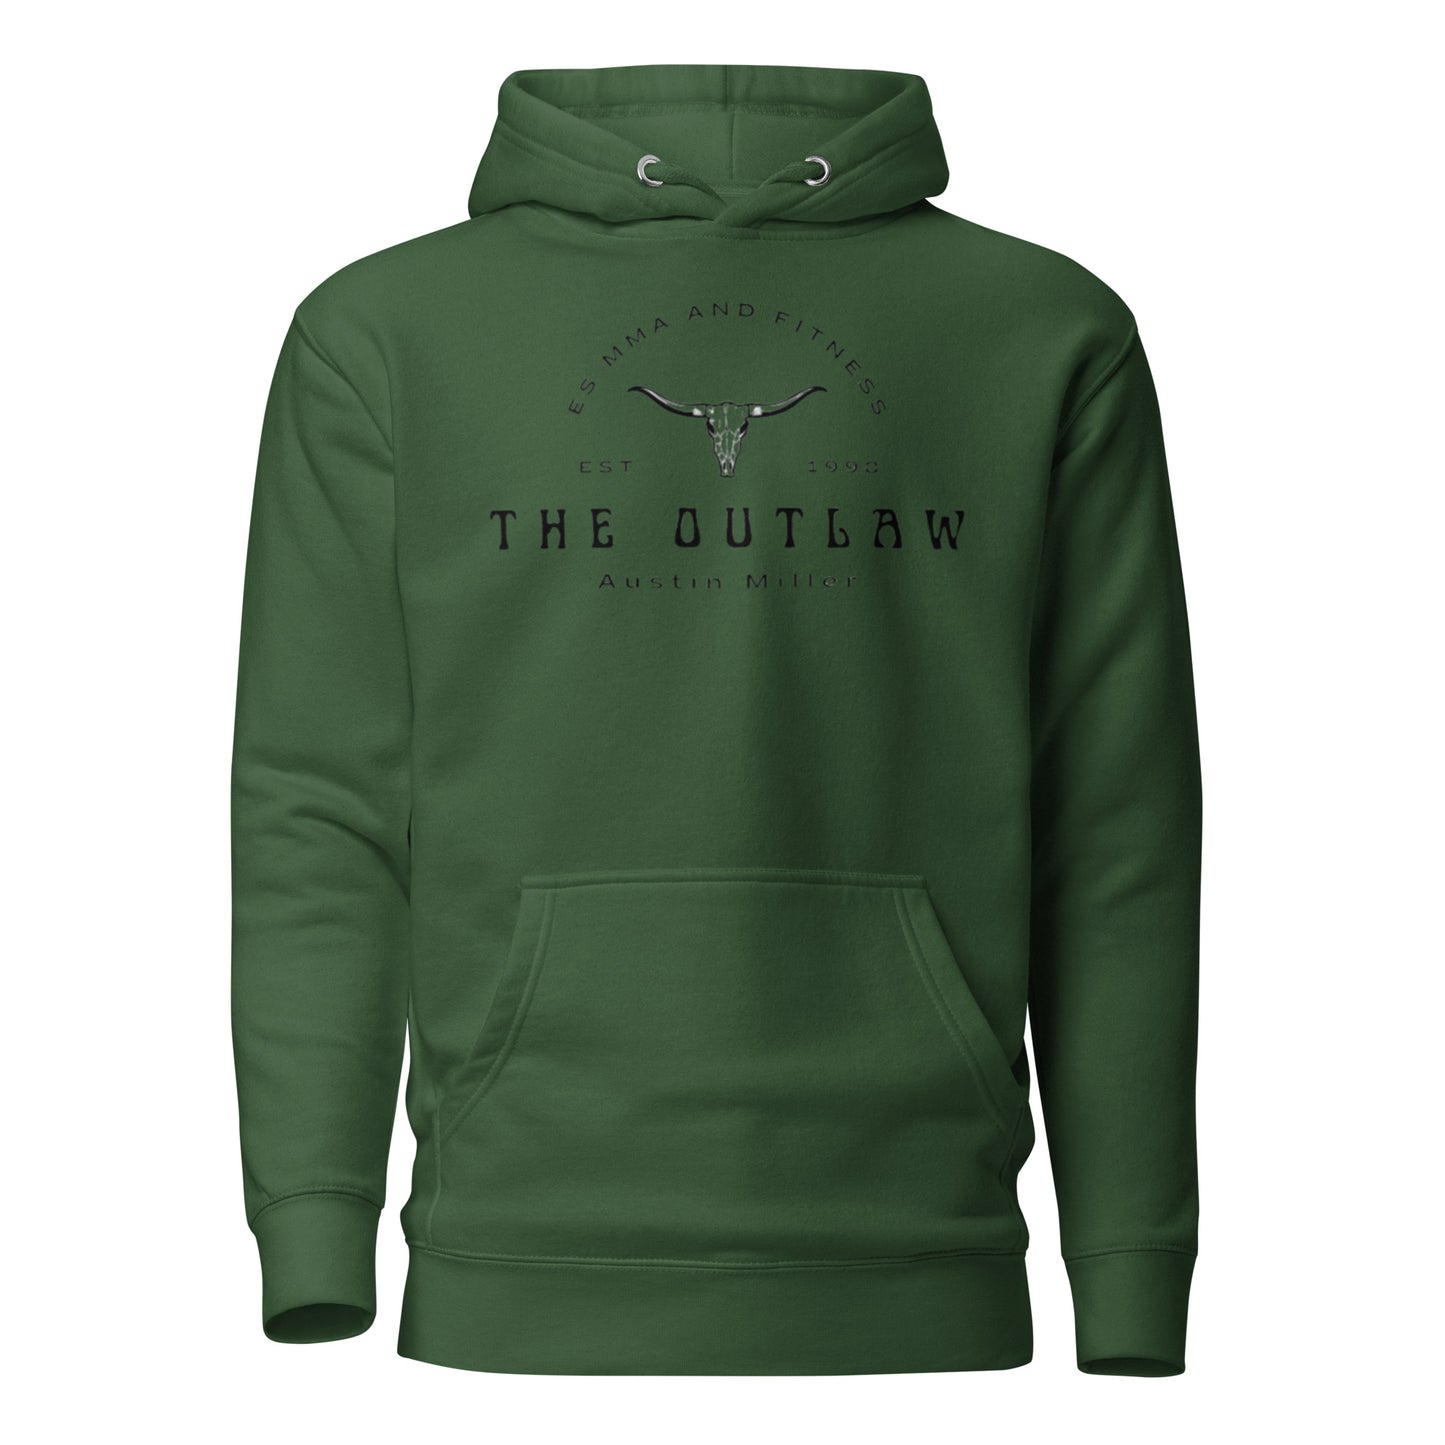 “The Outlaw” Collab